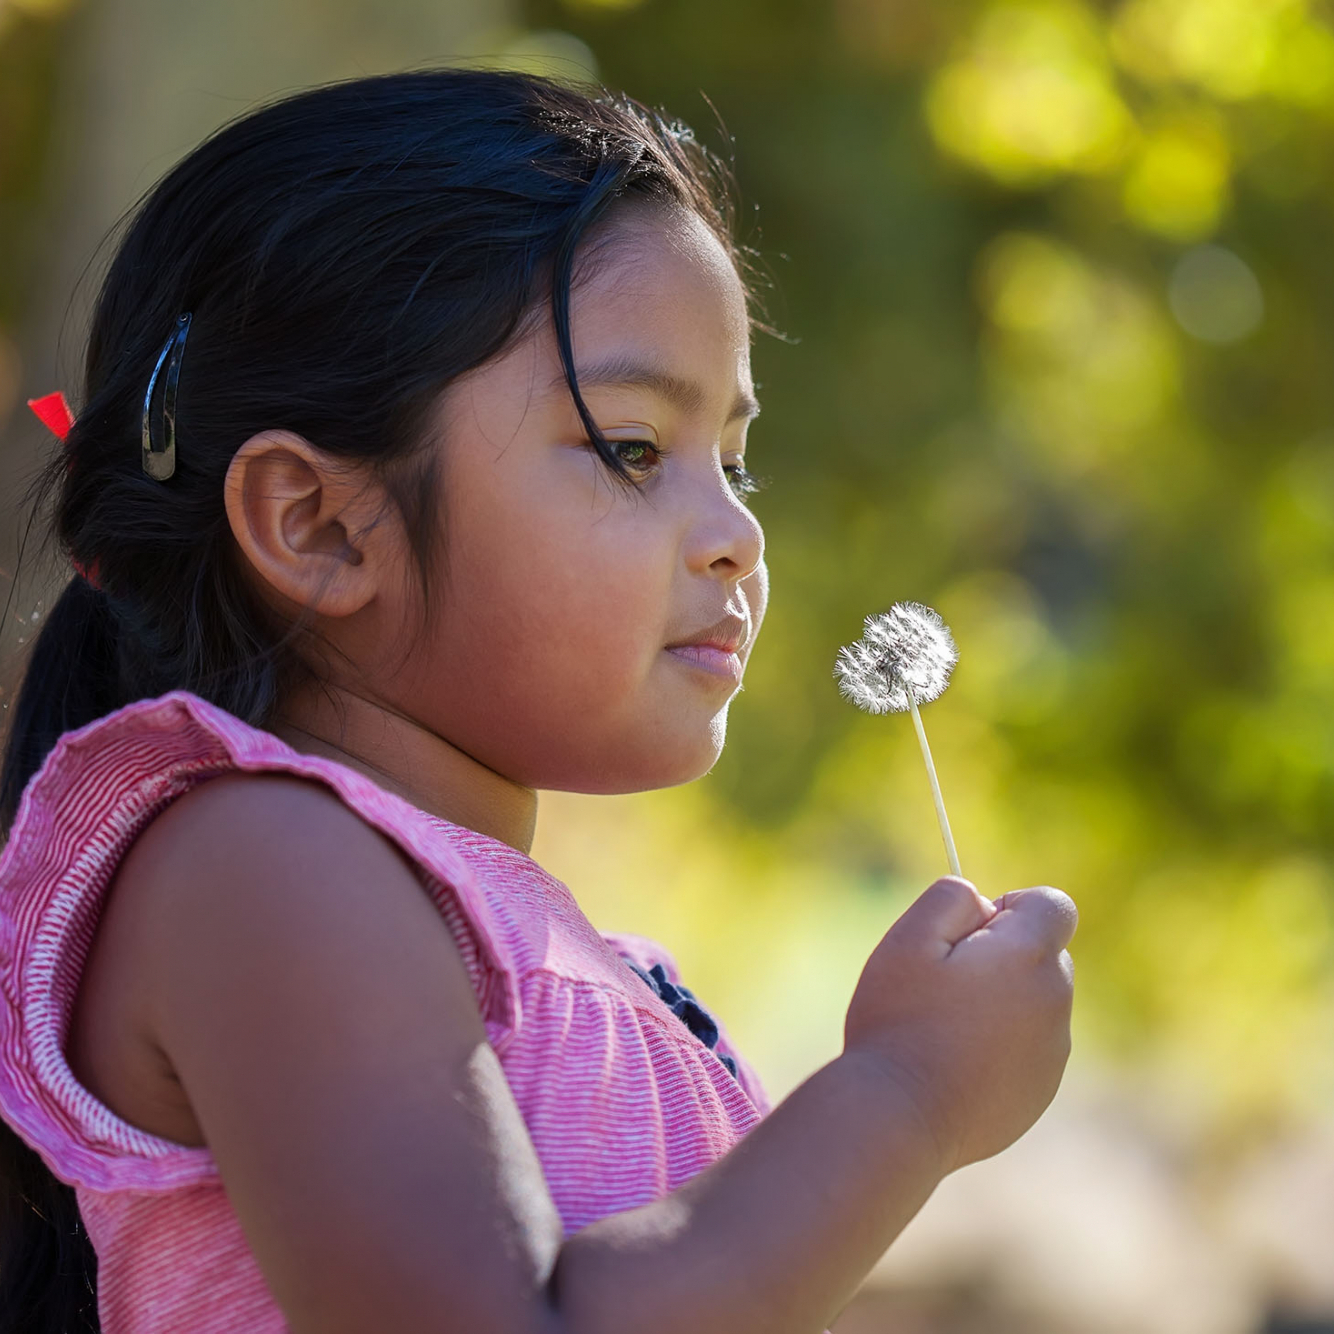 Behavioral Health Page | A thougthful little kid holding a dandelion in her hand that is close to her face and surrounded by green foliage.